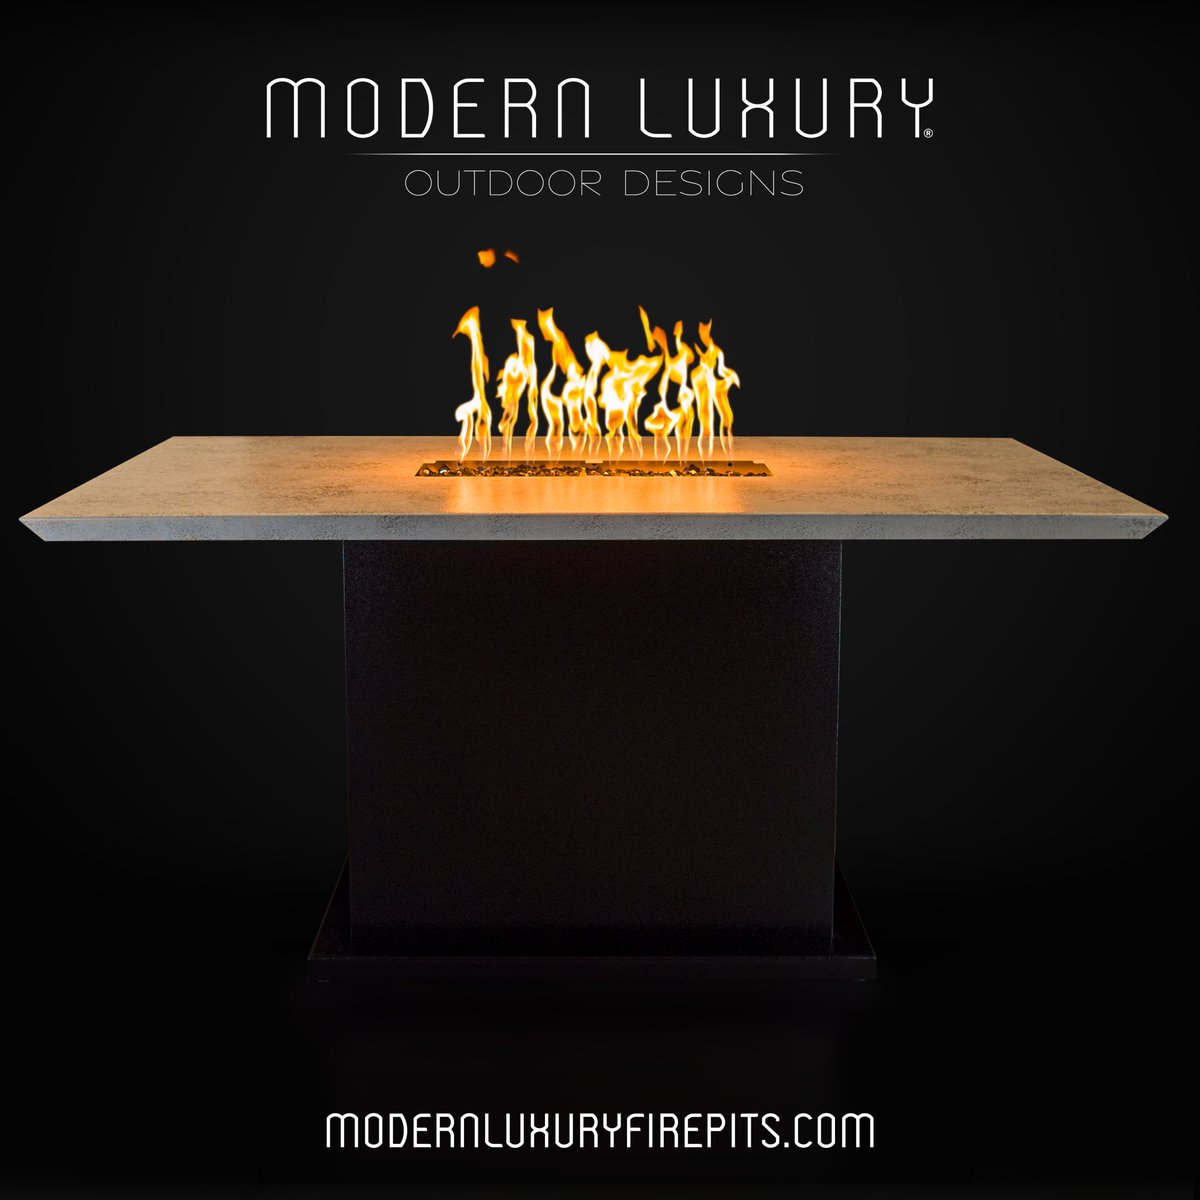 Check Out Our 84' x 44' Fire Table!!!

#modern #luxury #outdoorfurniture #luxurylifestyle #luxuryfurniture #modernoutdoors #firepit #fire #patiofurniture #patio #patiodecor #furniture